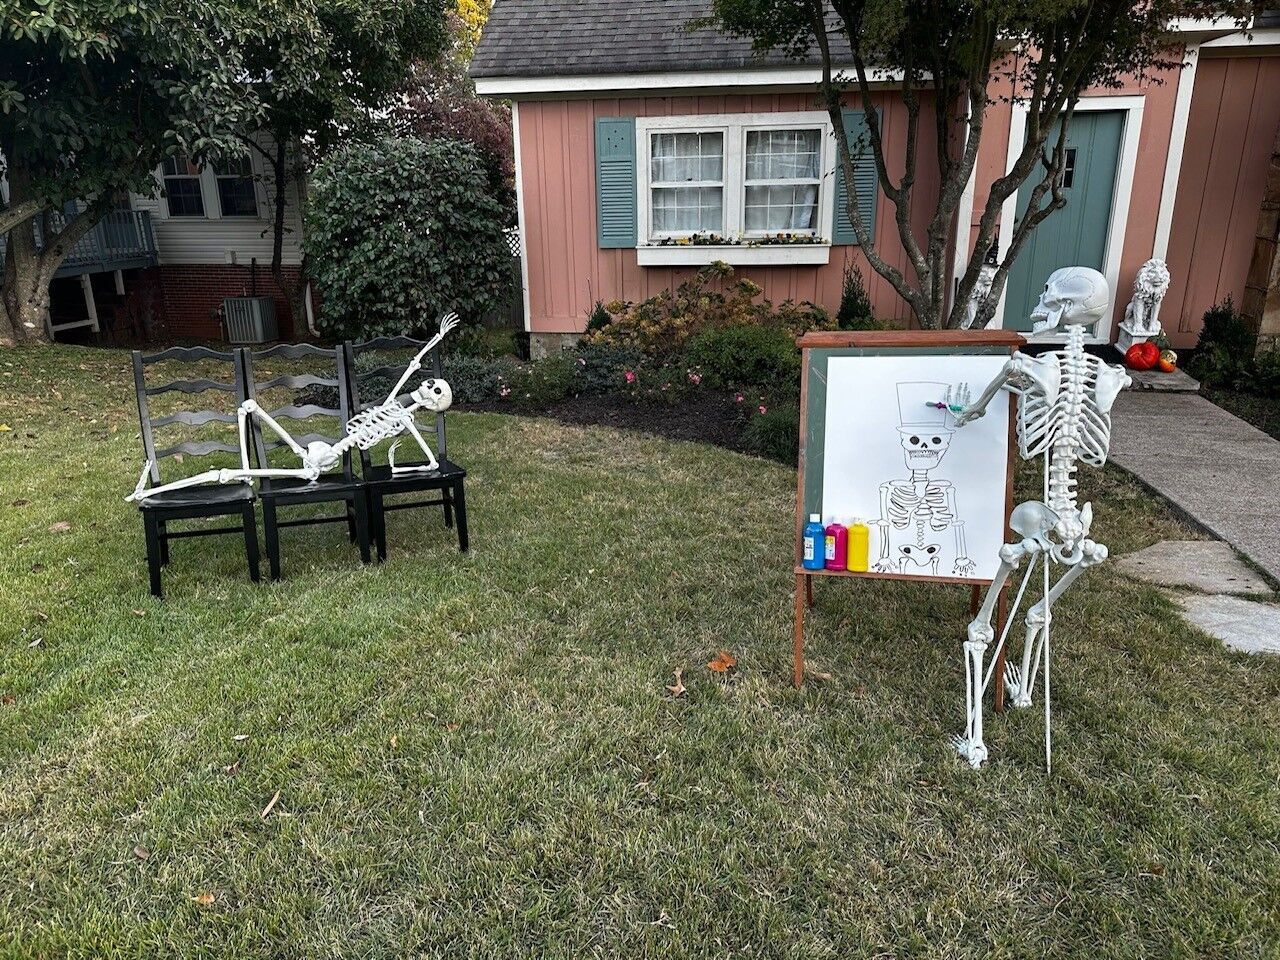 How to Maintain Your 12-Foot Skeleton and Other Giant Halloween Decorations  - The Home Depot